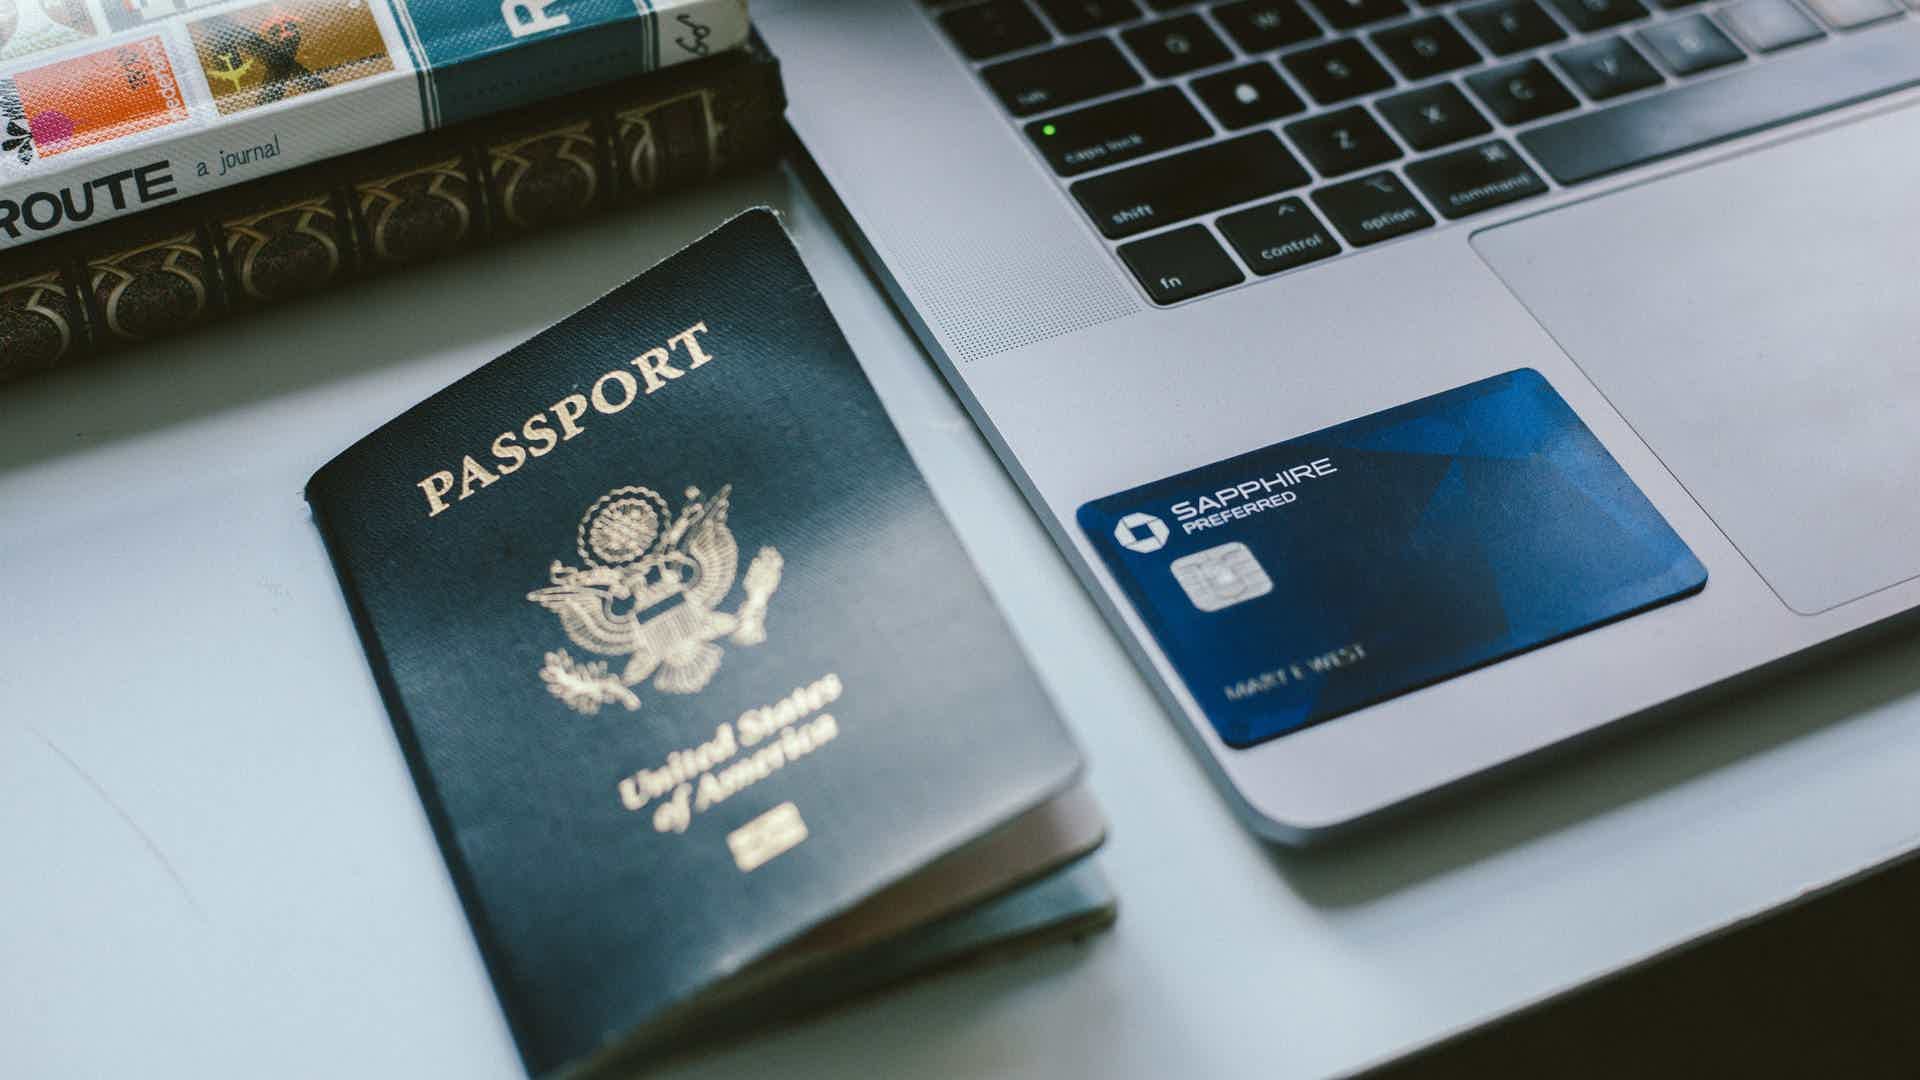 Learn the difference between travel cards or debit cards! Source: Unsplash